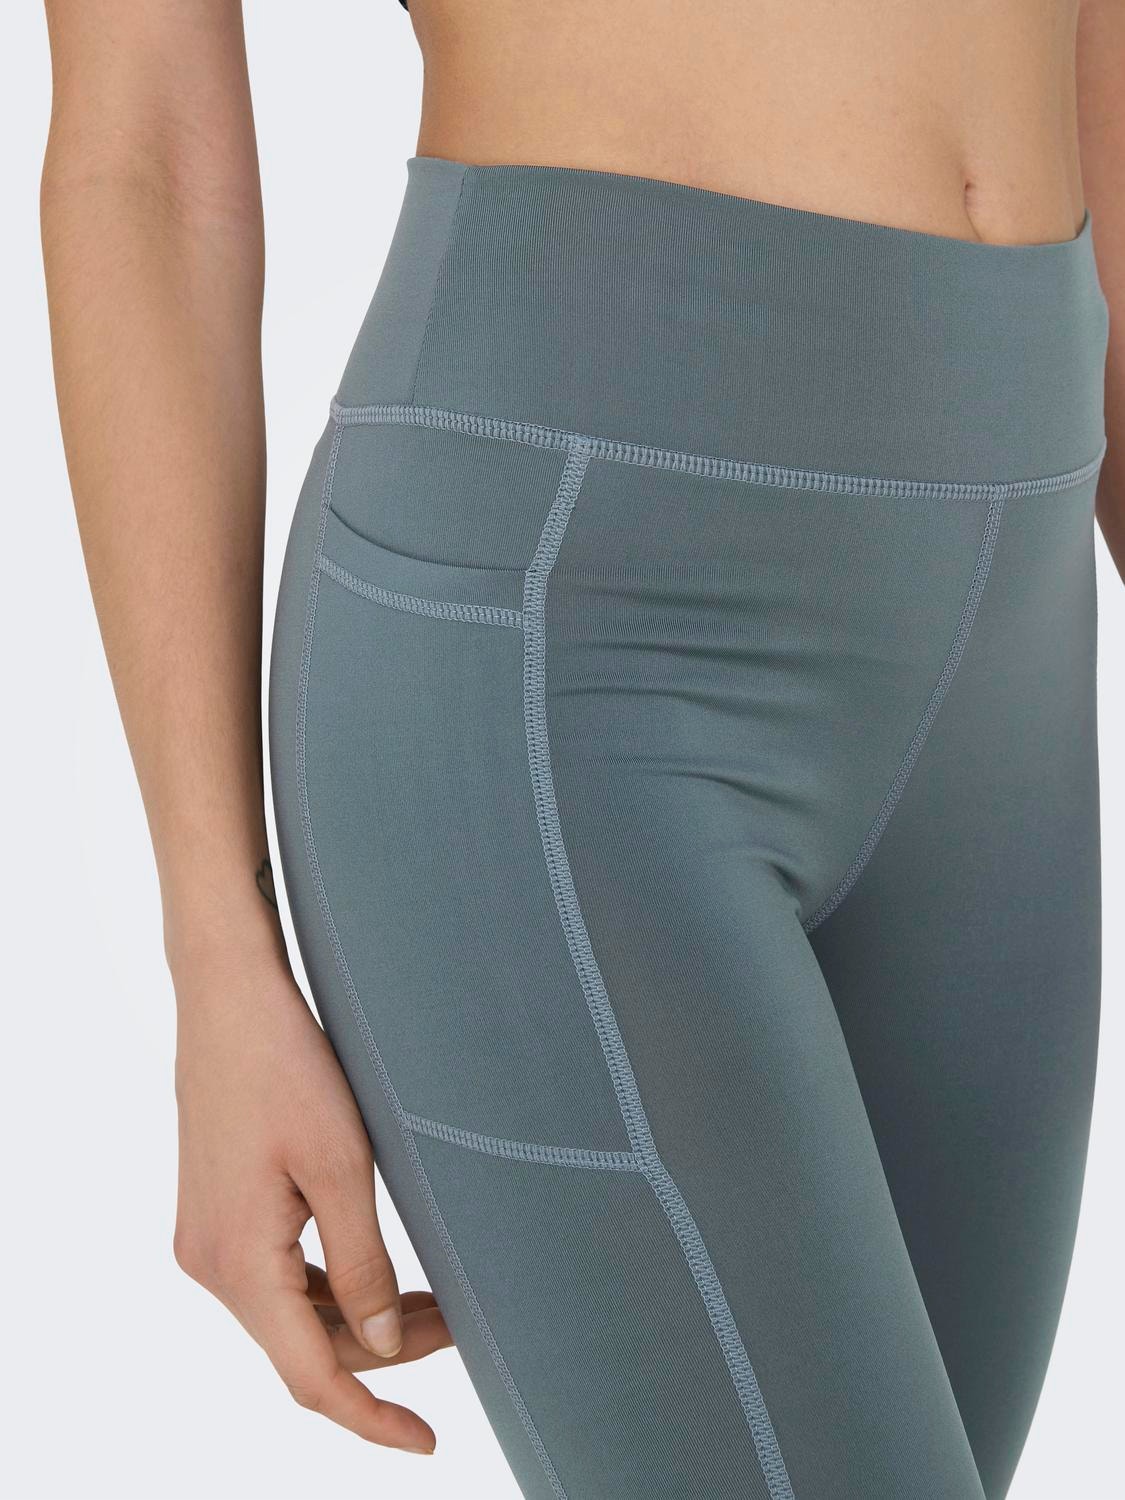 ONLY Tight fit High waist Legging -Stormy Weather - 15295214